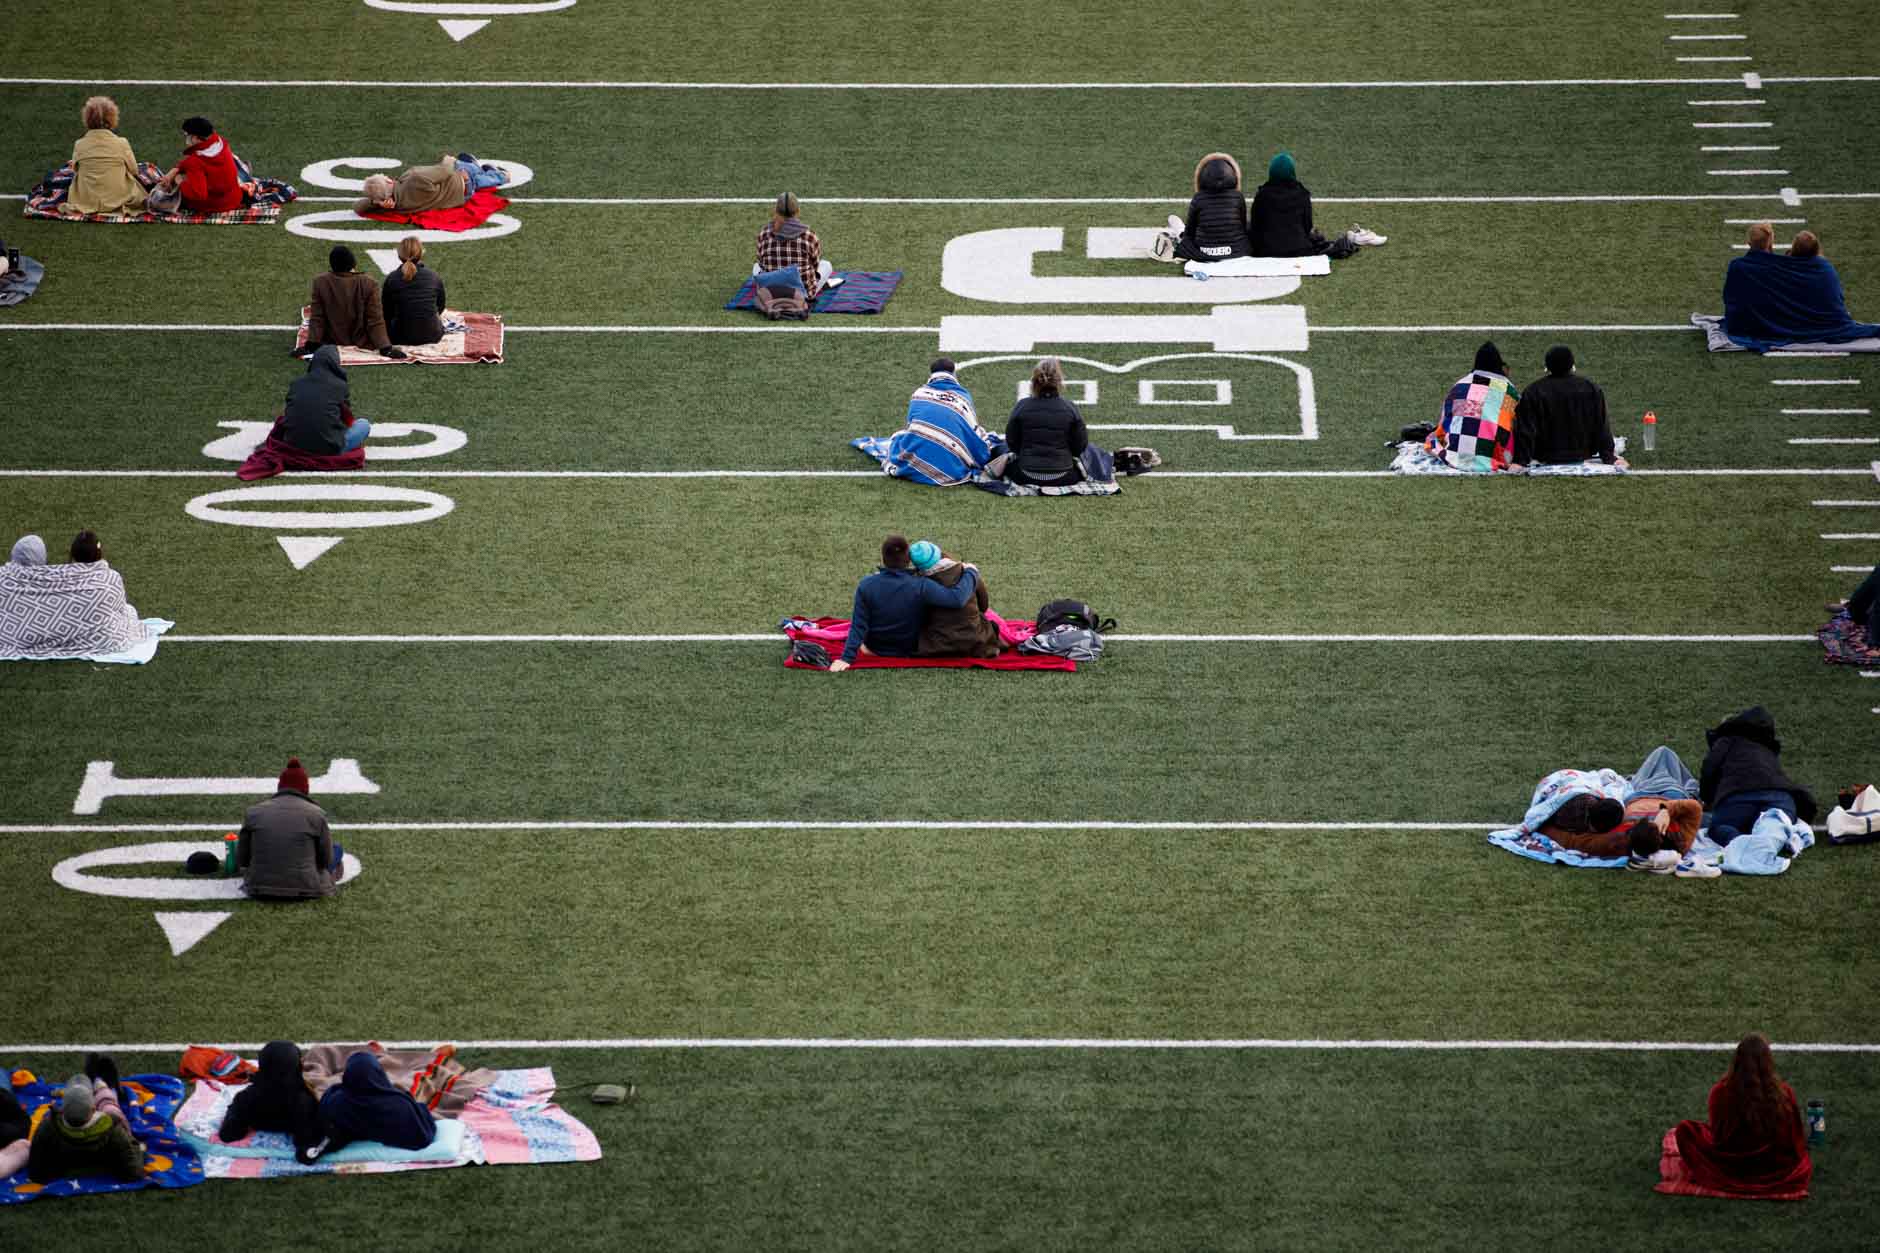 Audience members watch a socially-distant screening of "Cinema Paradiso" from the field in Memorial Stadium at IU Bloomington on Tuesday, Sept. 29, 2020. (James Brosher/Indiana University)